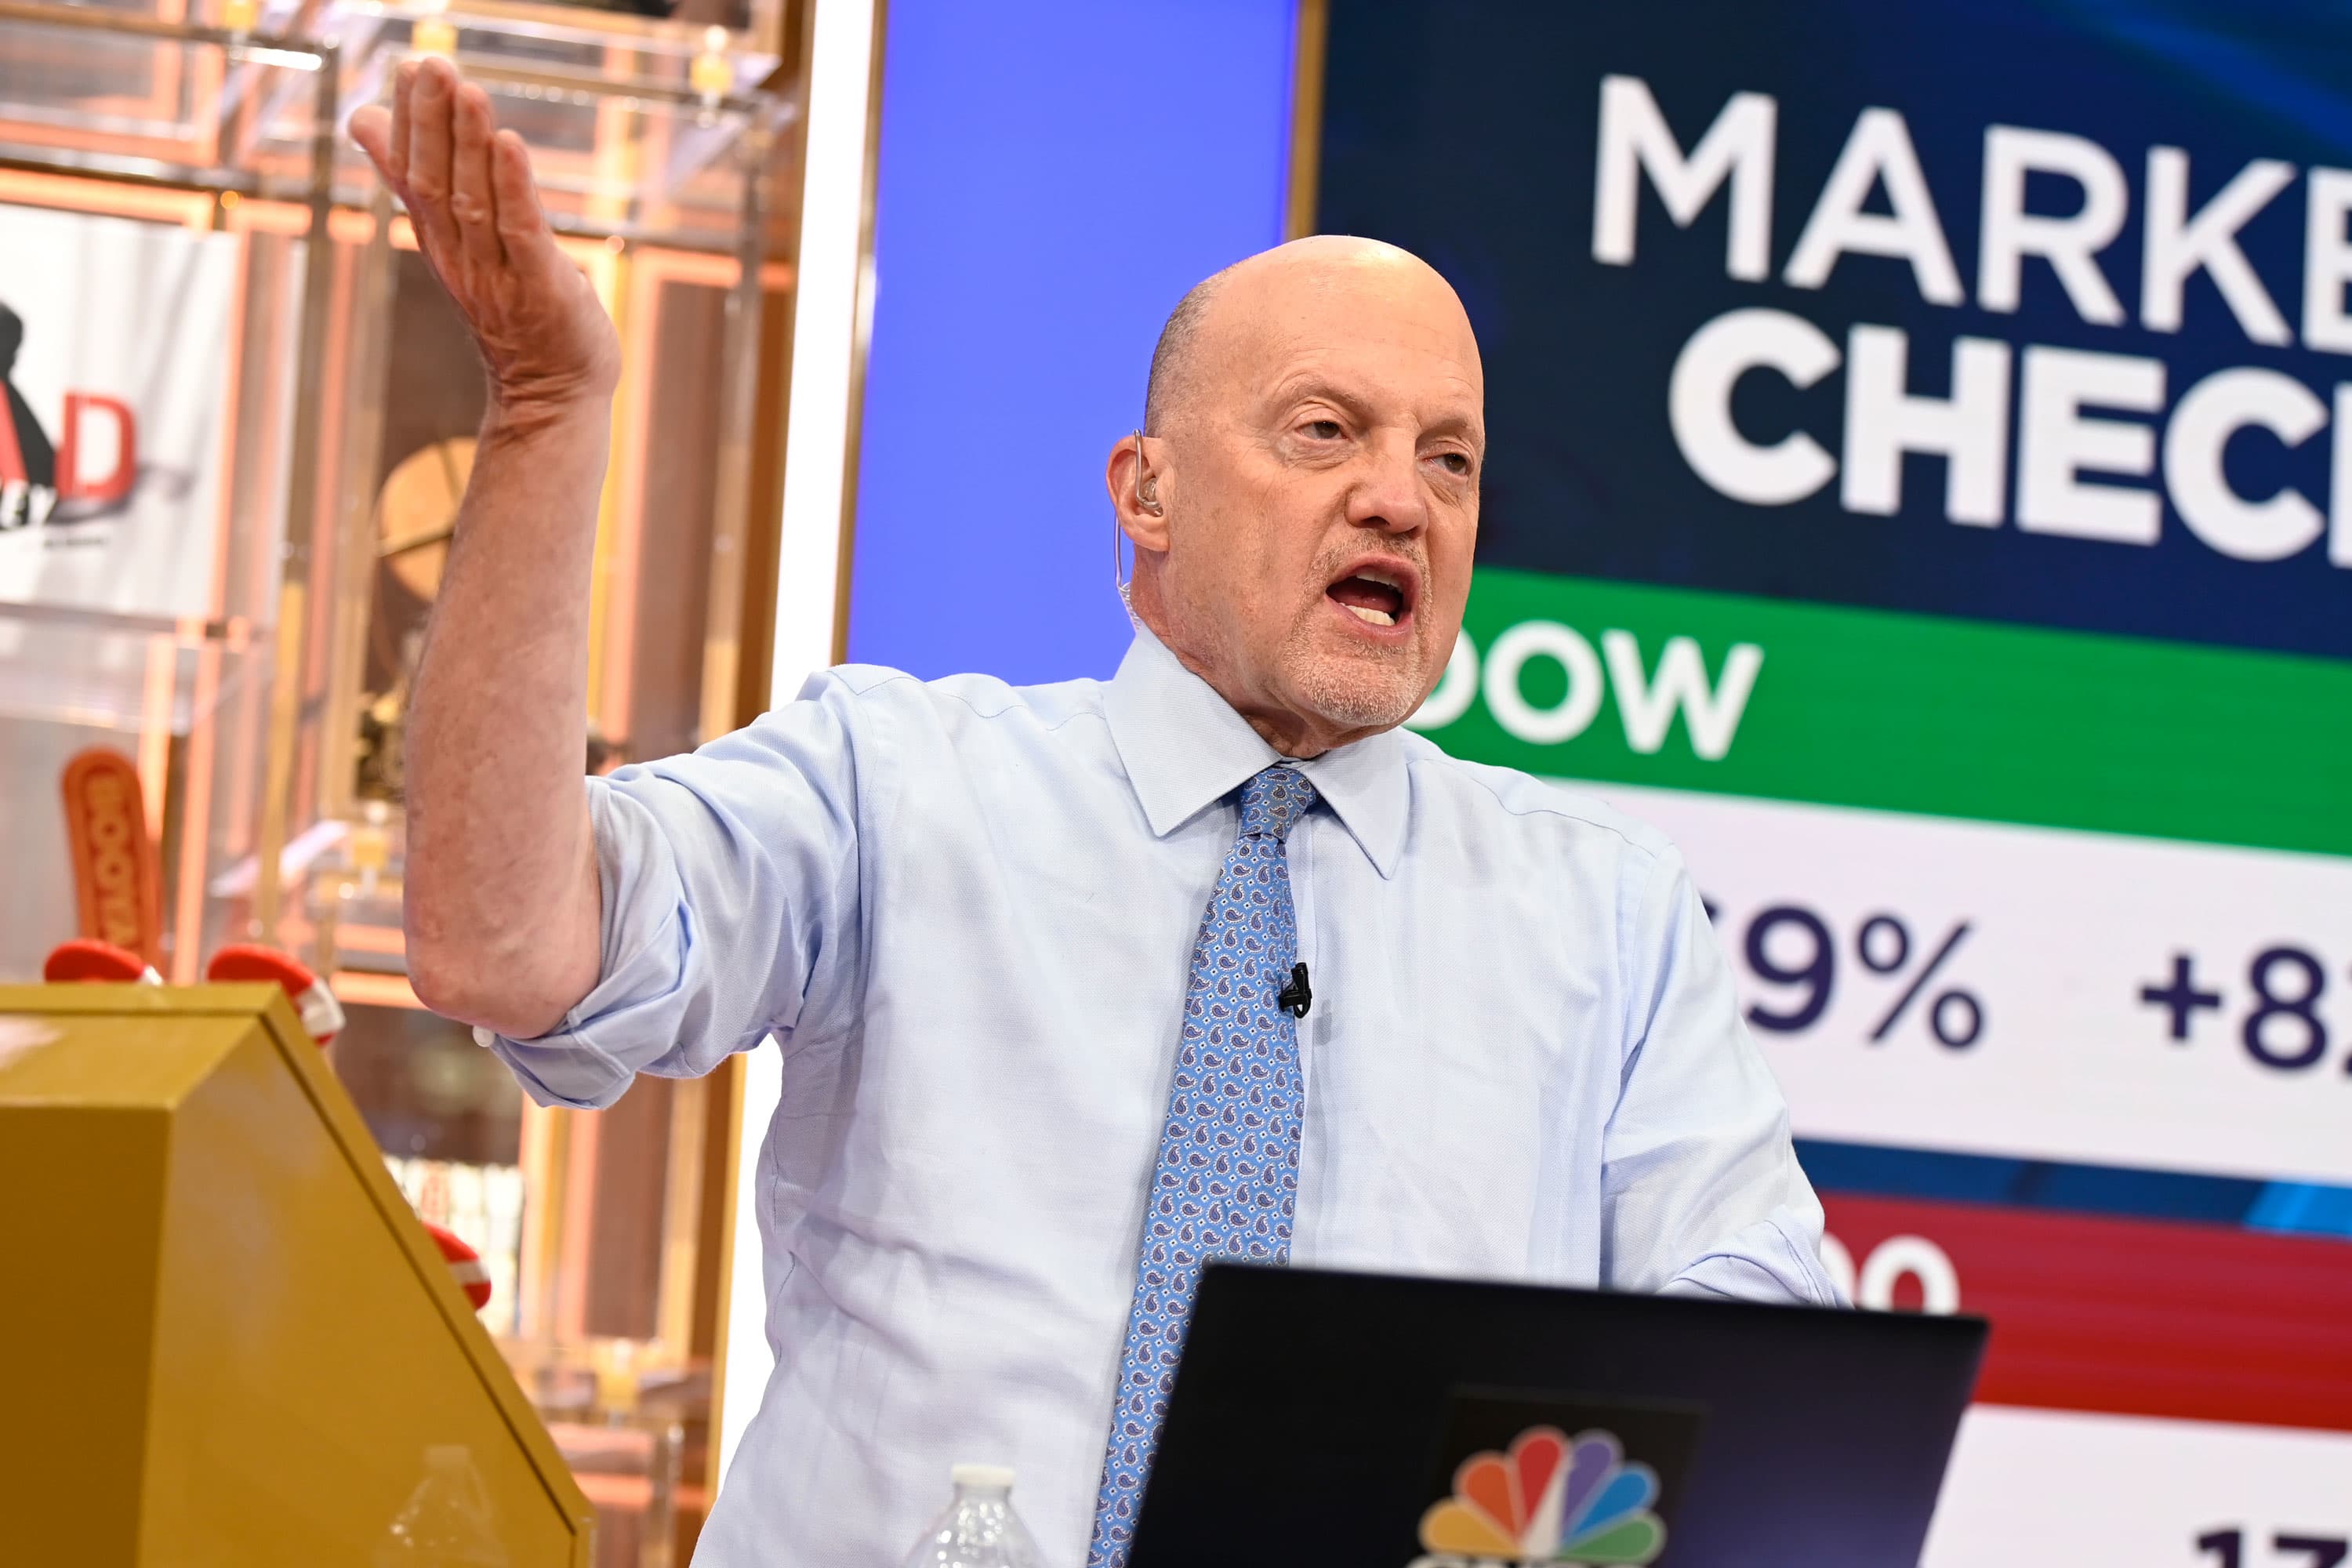 Jim Cramer says off-price retailer TJX could be 'eating the carcass' of Bed Bath & Beyond 